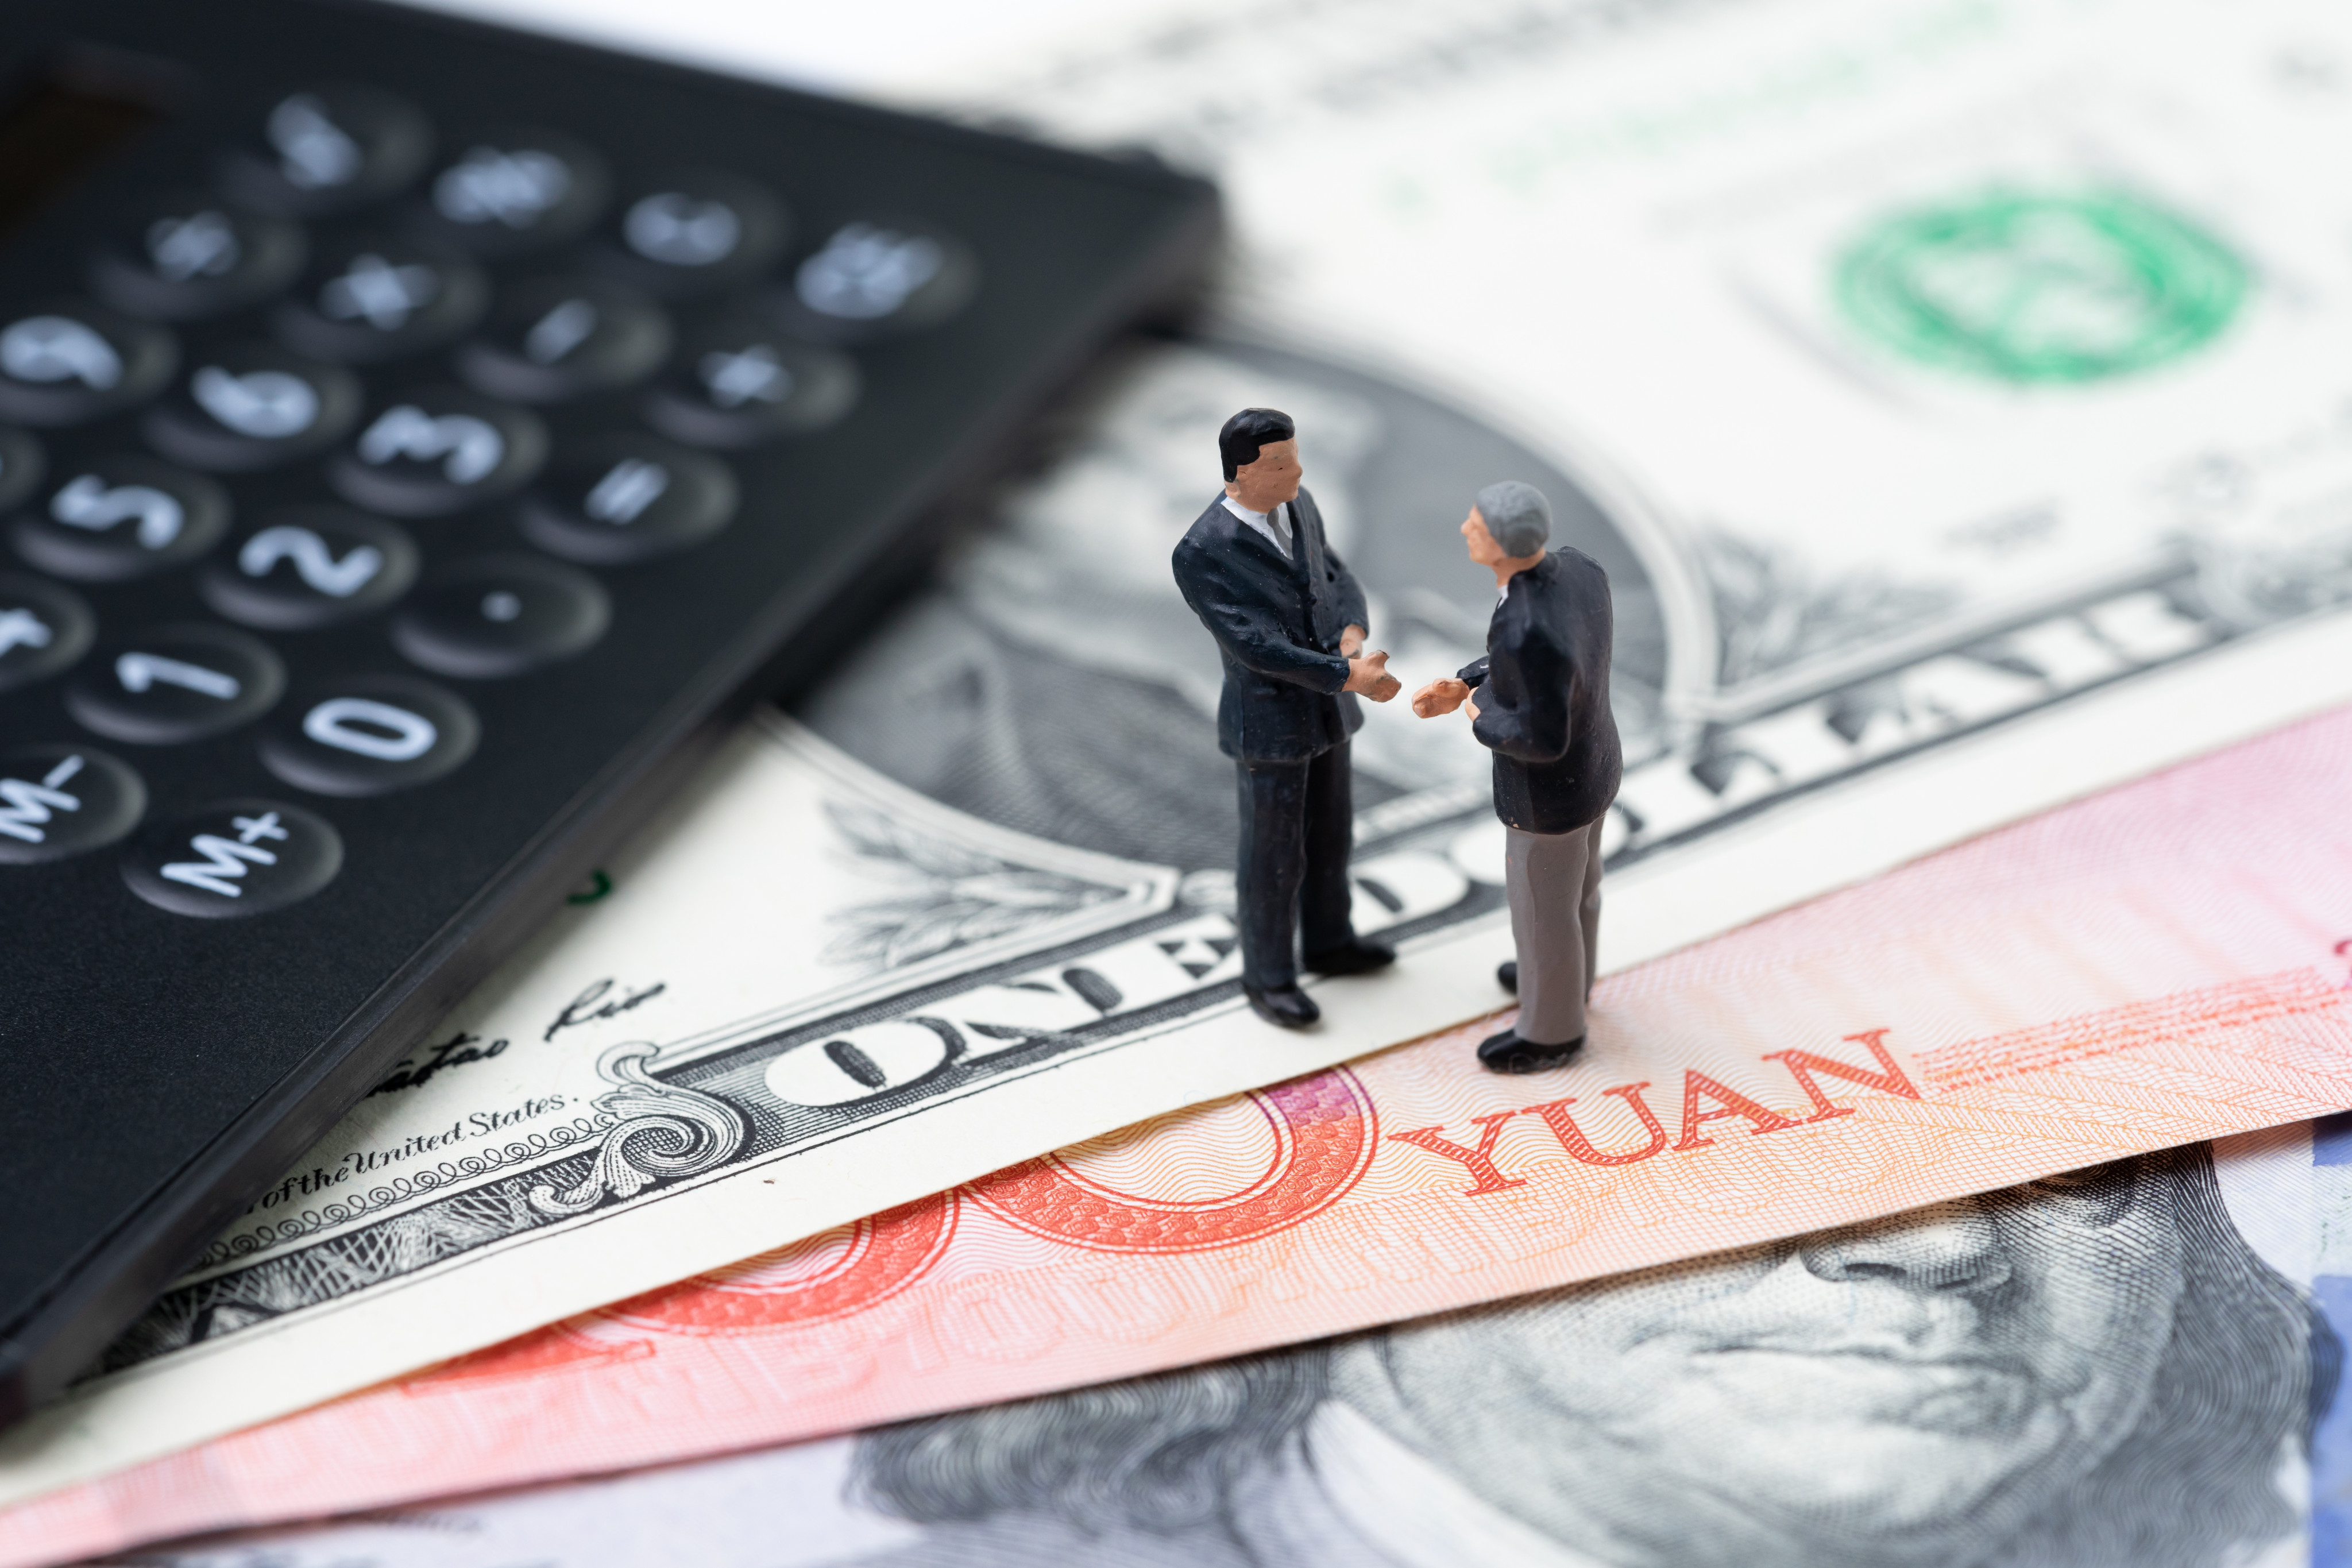 China’s yuan is poised to surpass the Japanese yen and British pound as a global reserve currency in the coming years, but not the US dollar. Photo: Shutterstock